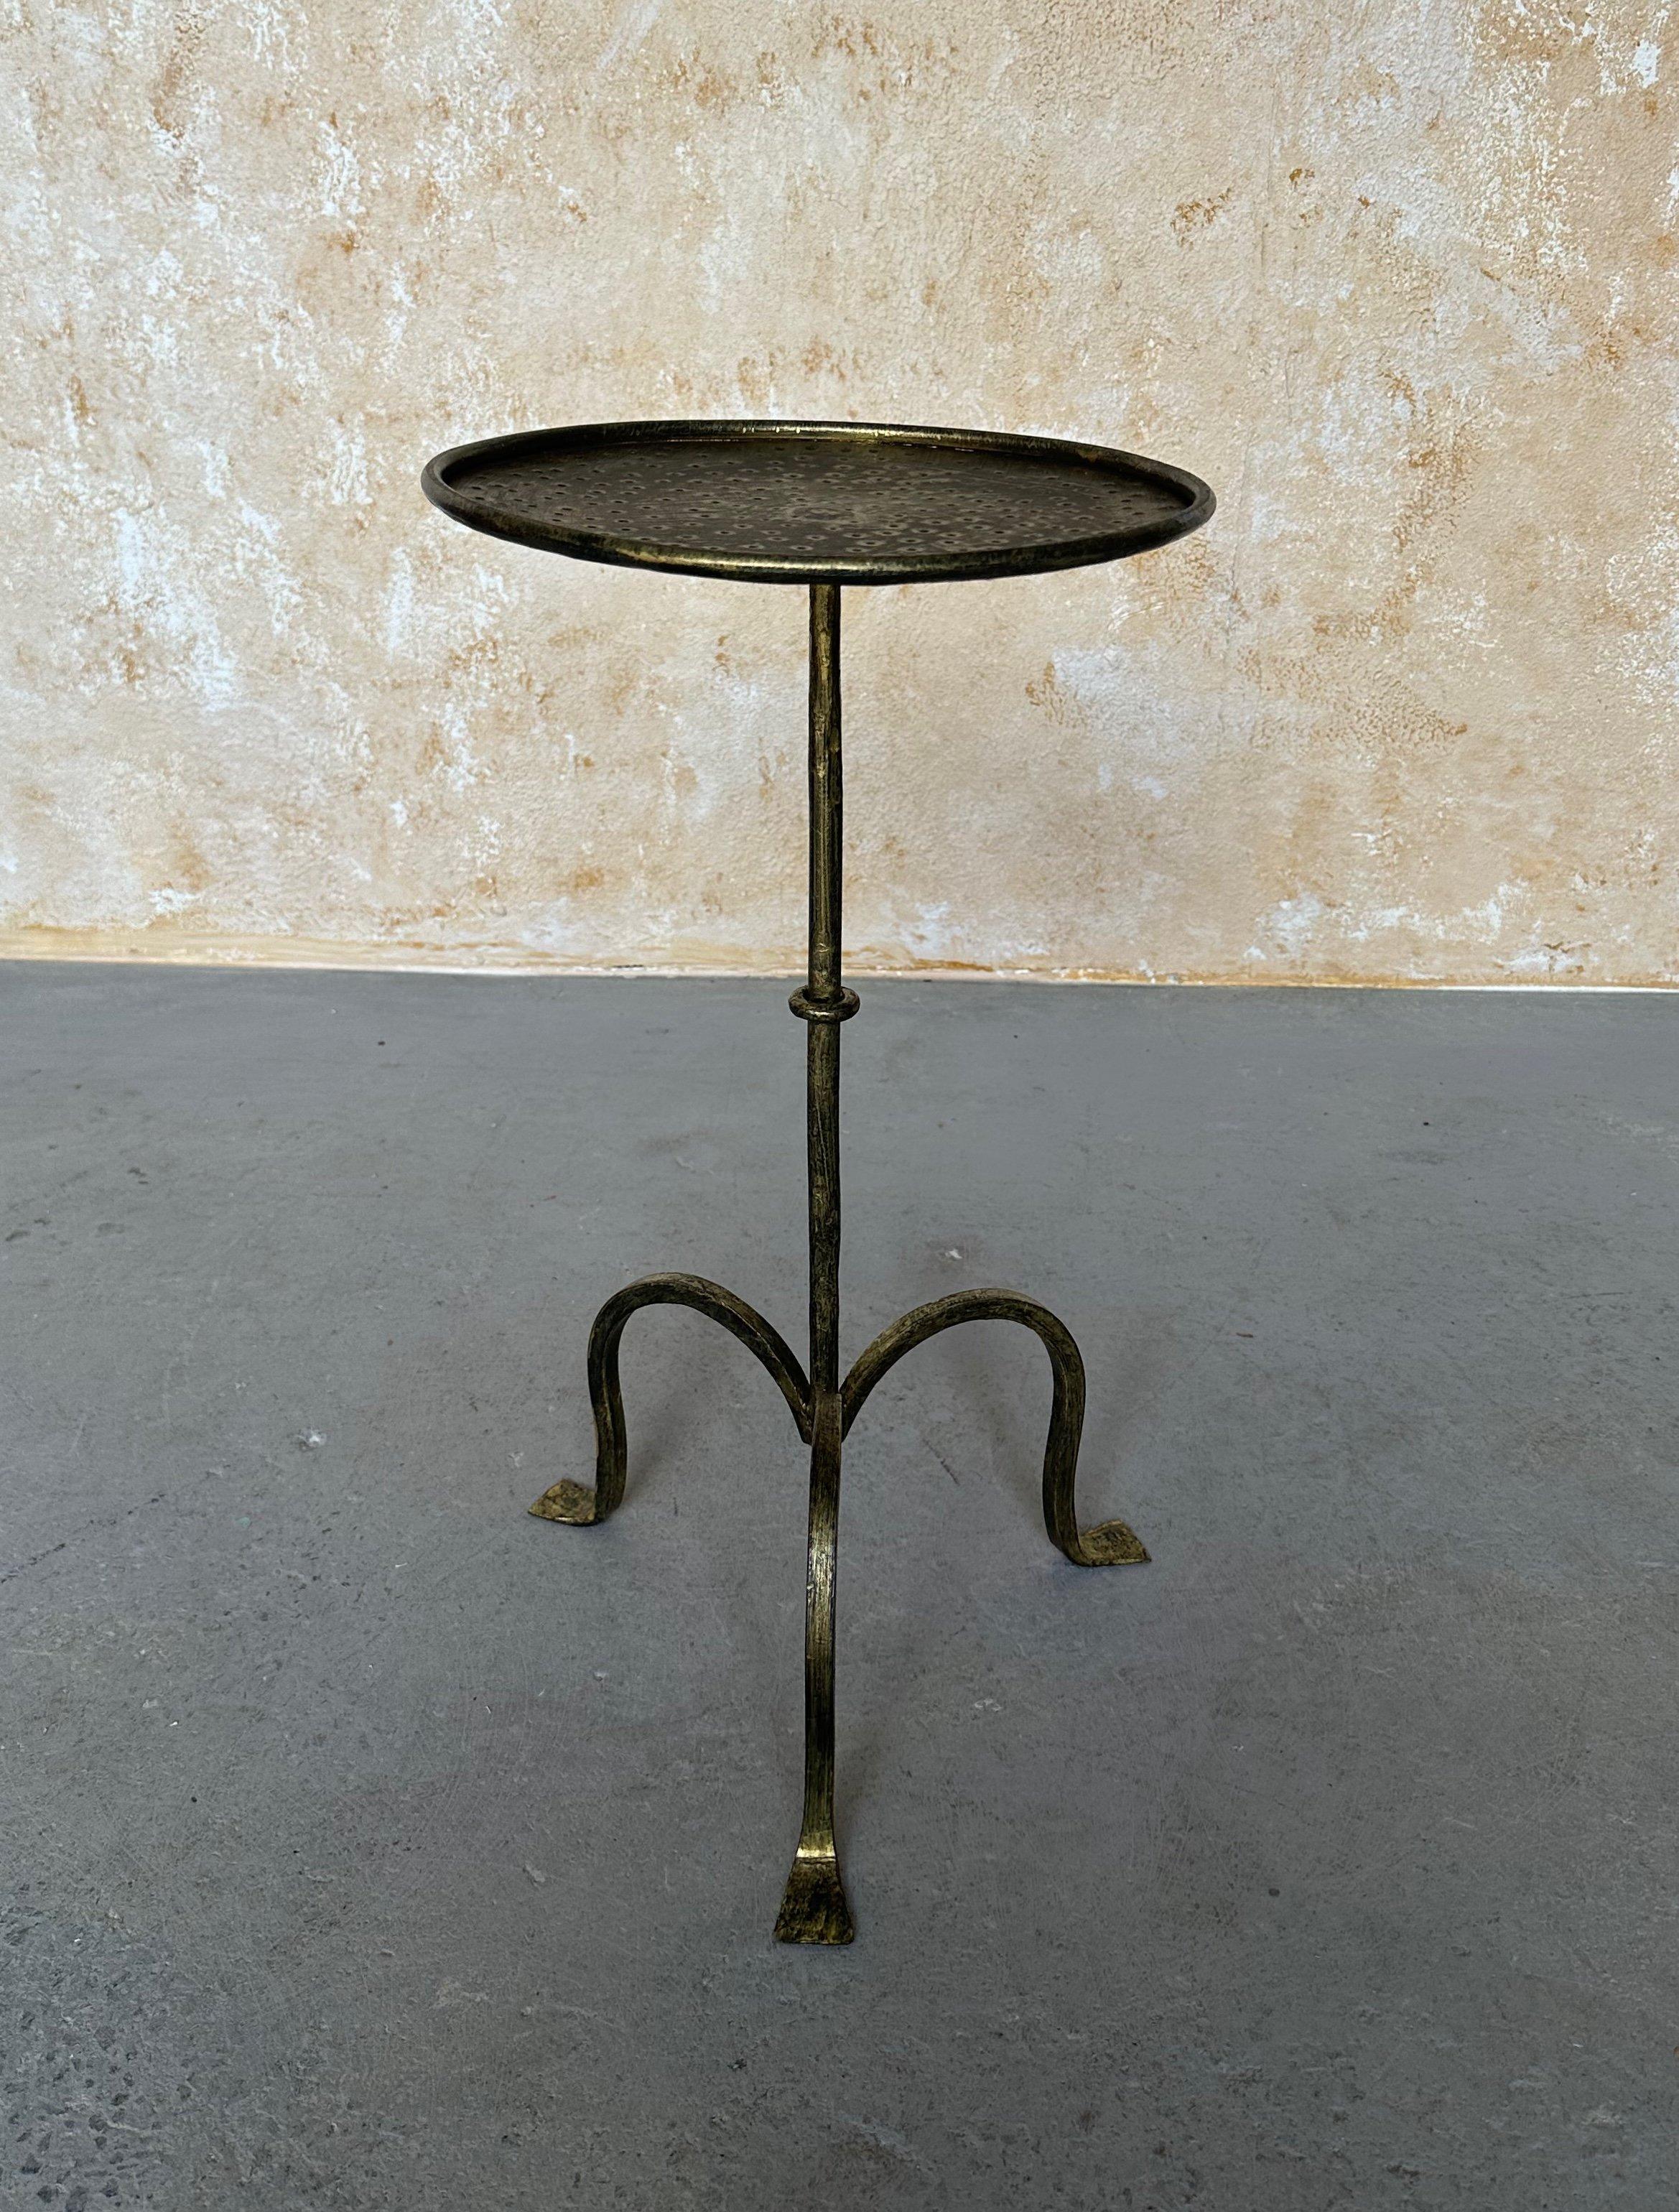 This elegant Spanish end table was recently created by skilled European artisans using traditional iron working techniques. Hand-forged from iron, it features a stem with a central ring detail mounted on a sturdy tripod base with curved legs. The